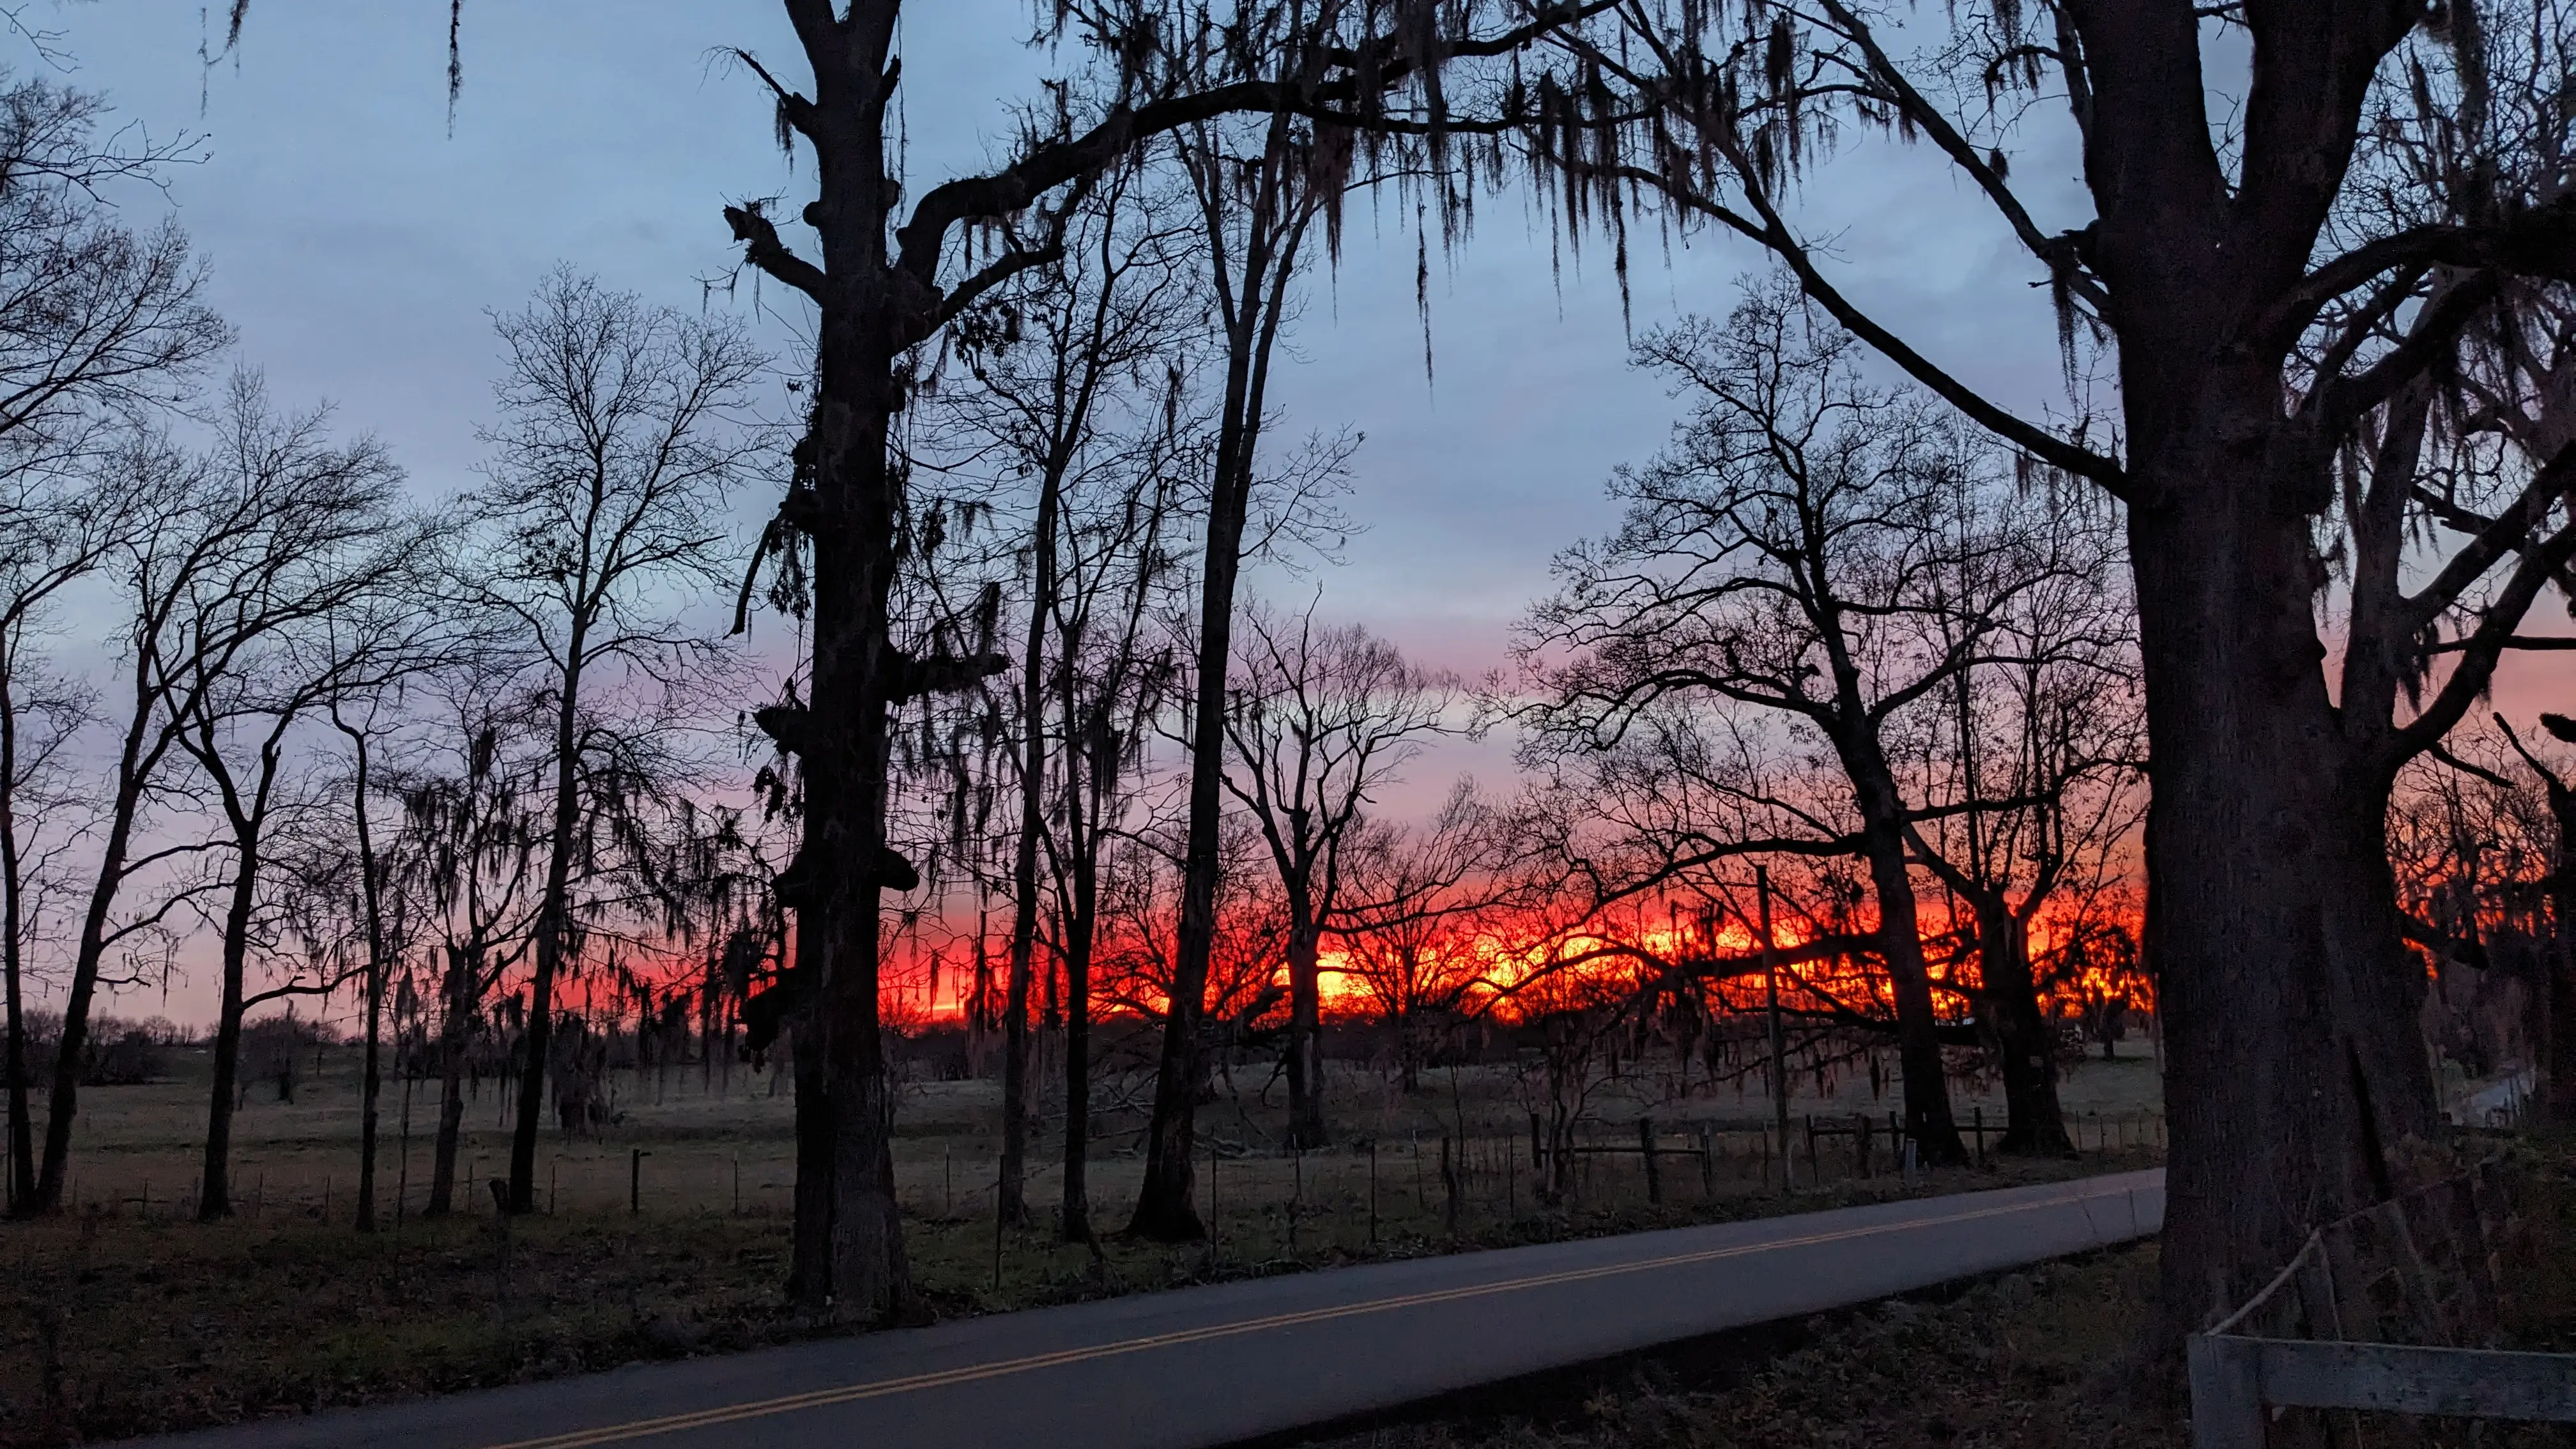 A fiery sunset looking through a field of trees.